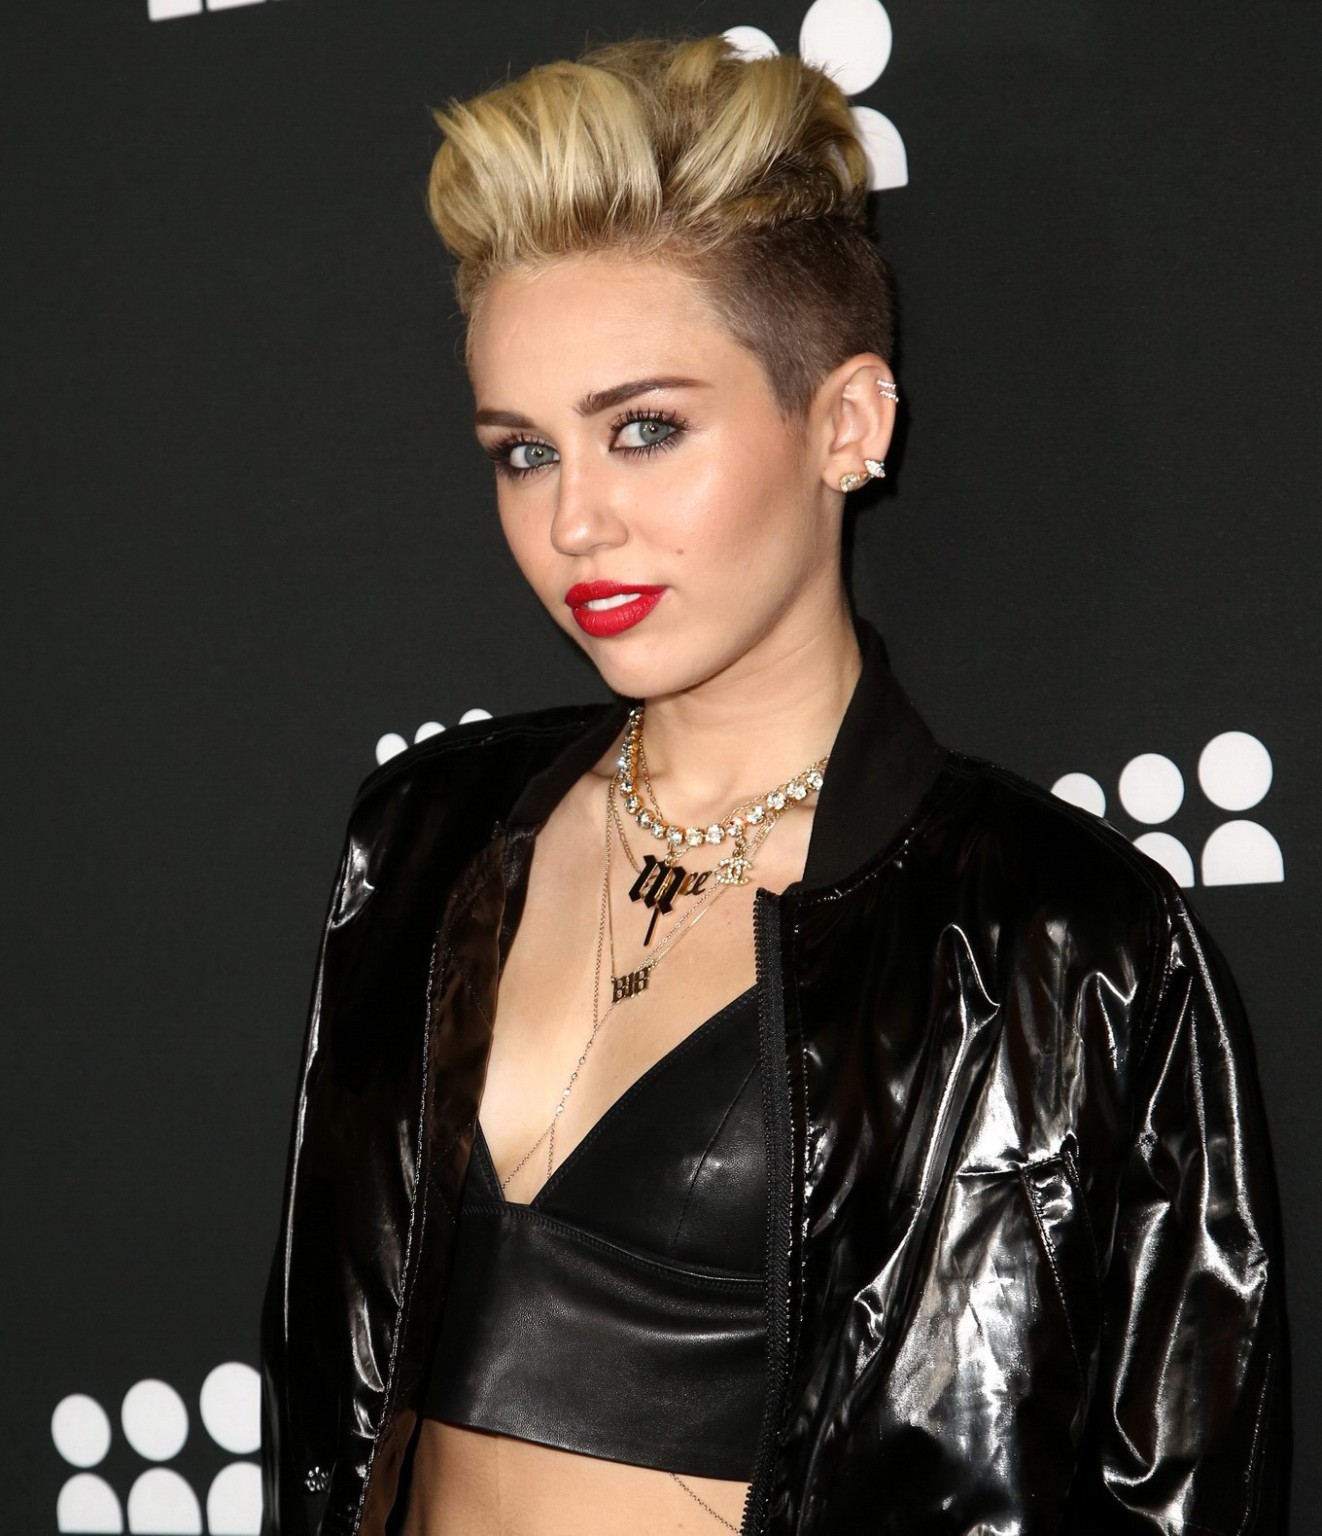 Miley Cyrus wearing a leather crop top at the Myspace launch event #75228726